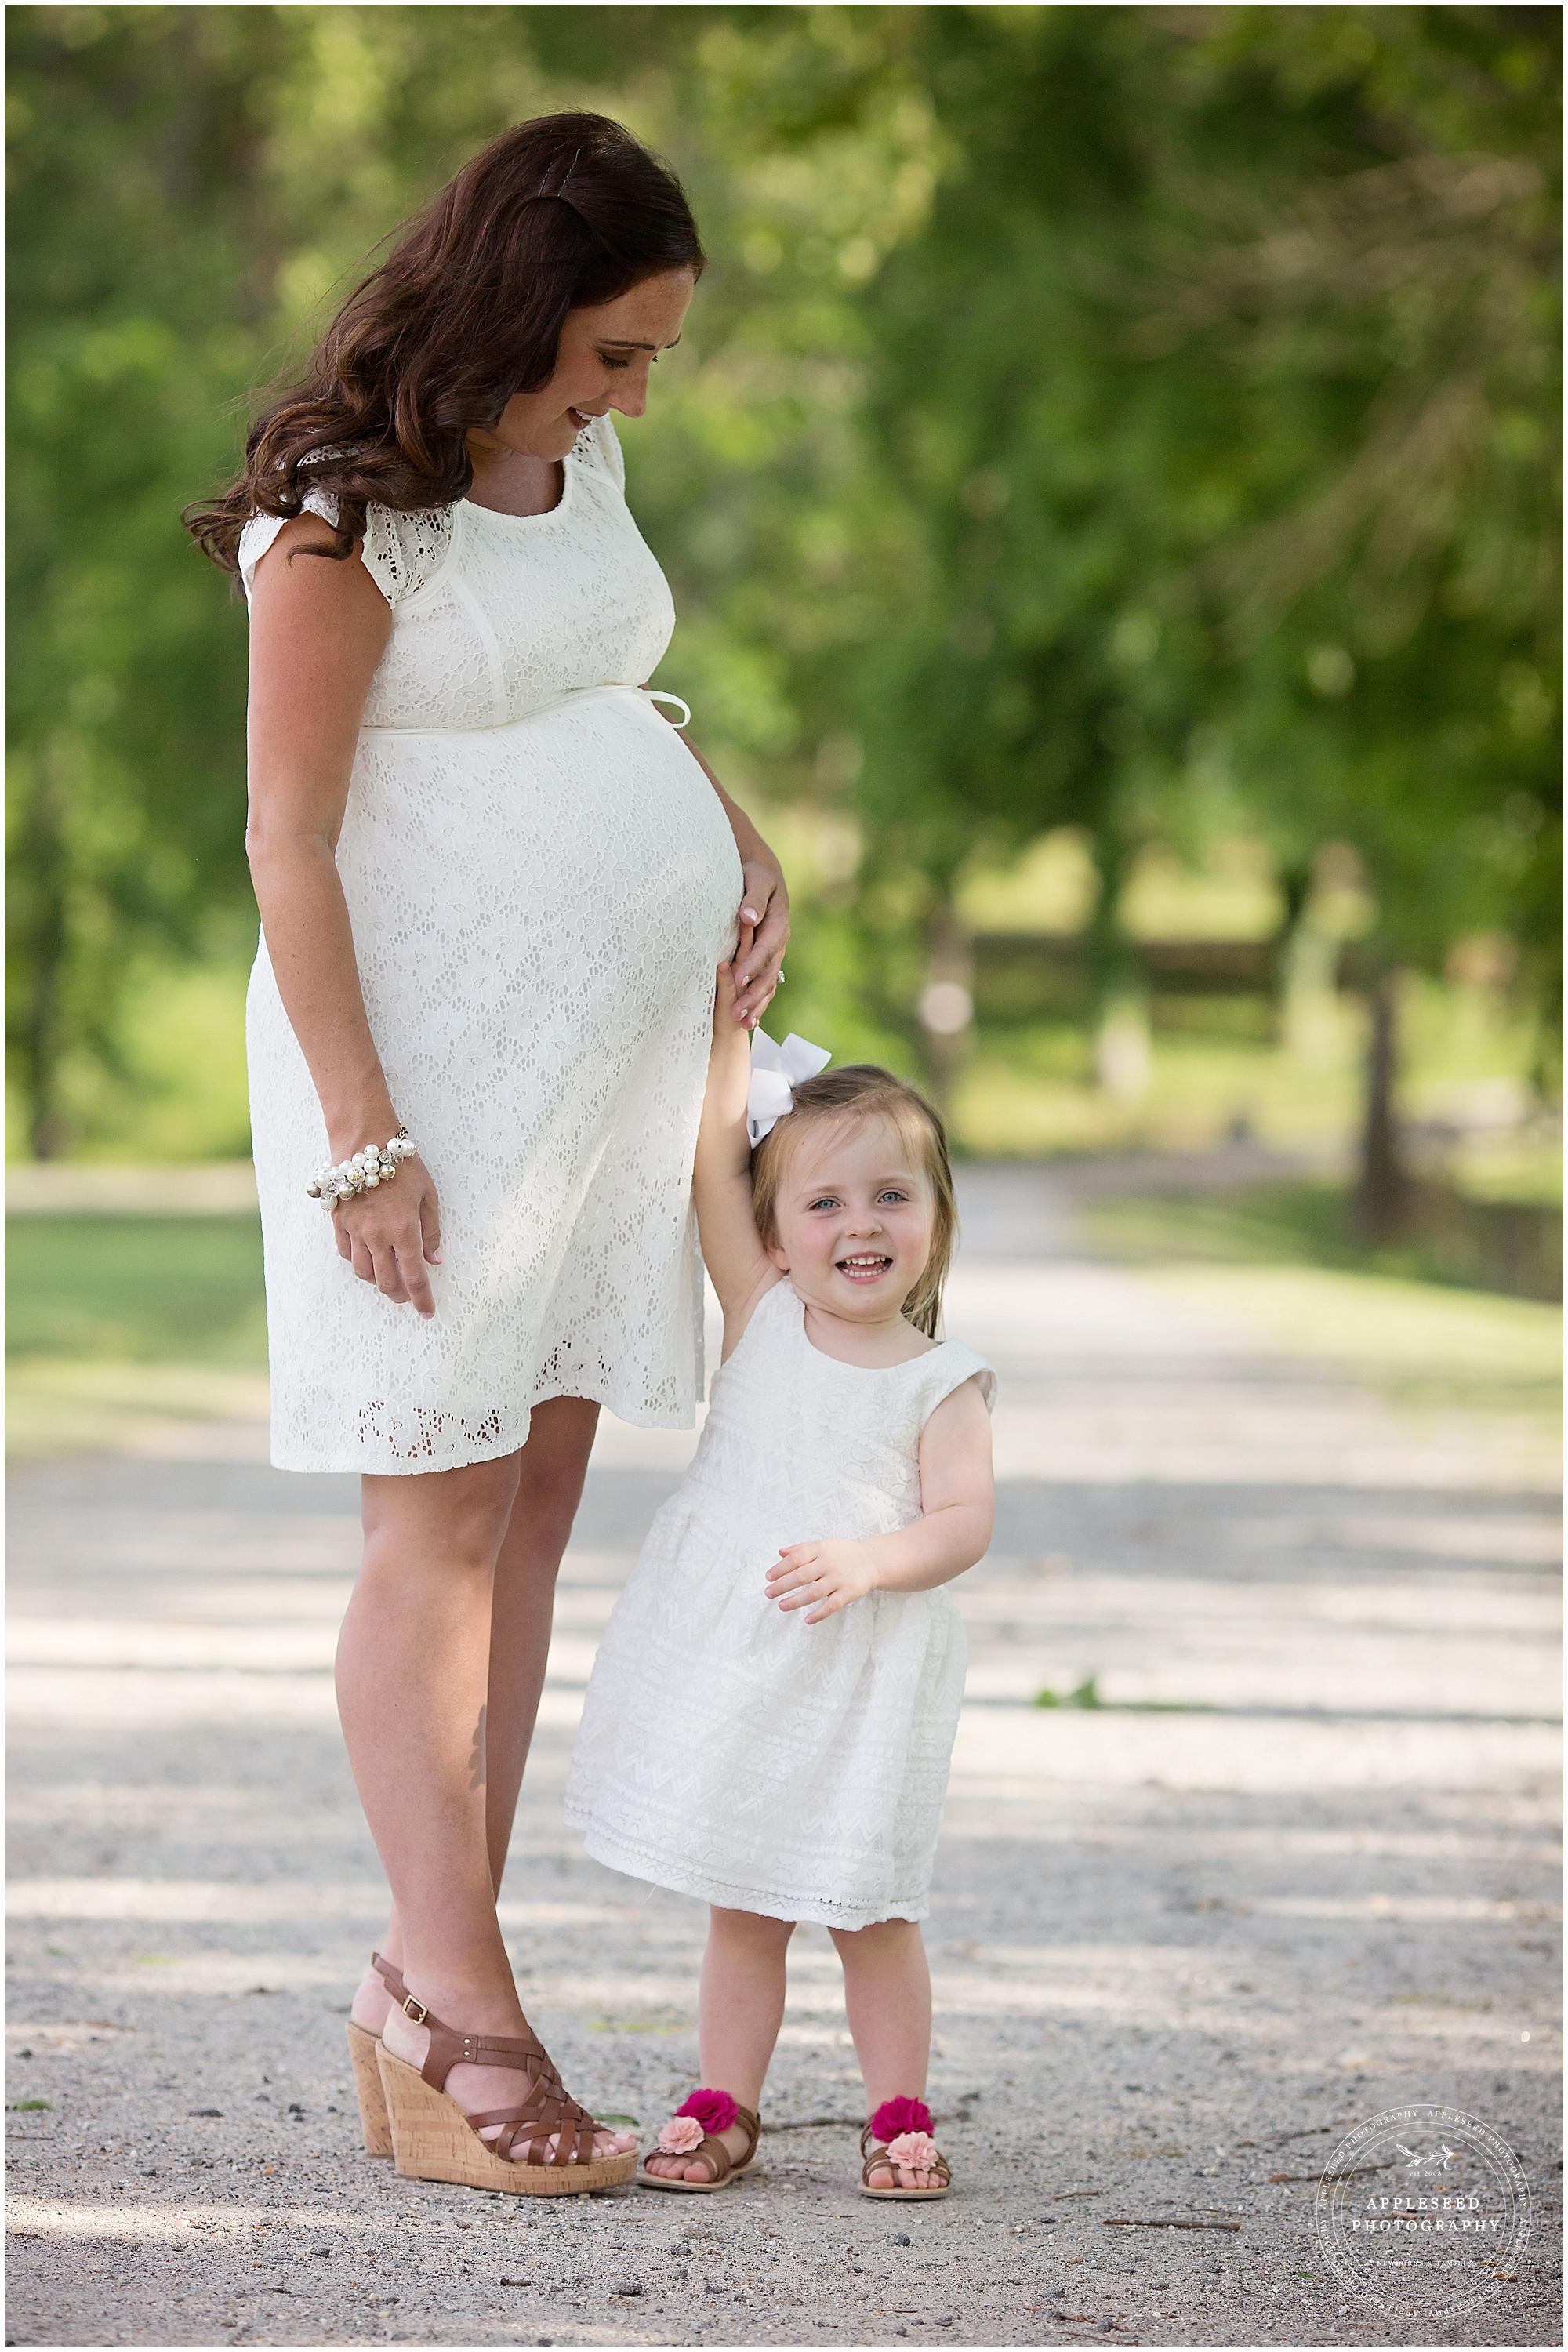 Atlanta Maternity Photographer | Outdoor Maternity Session | Appleseed Photography